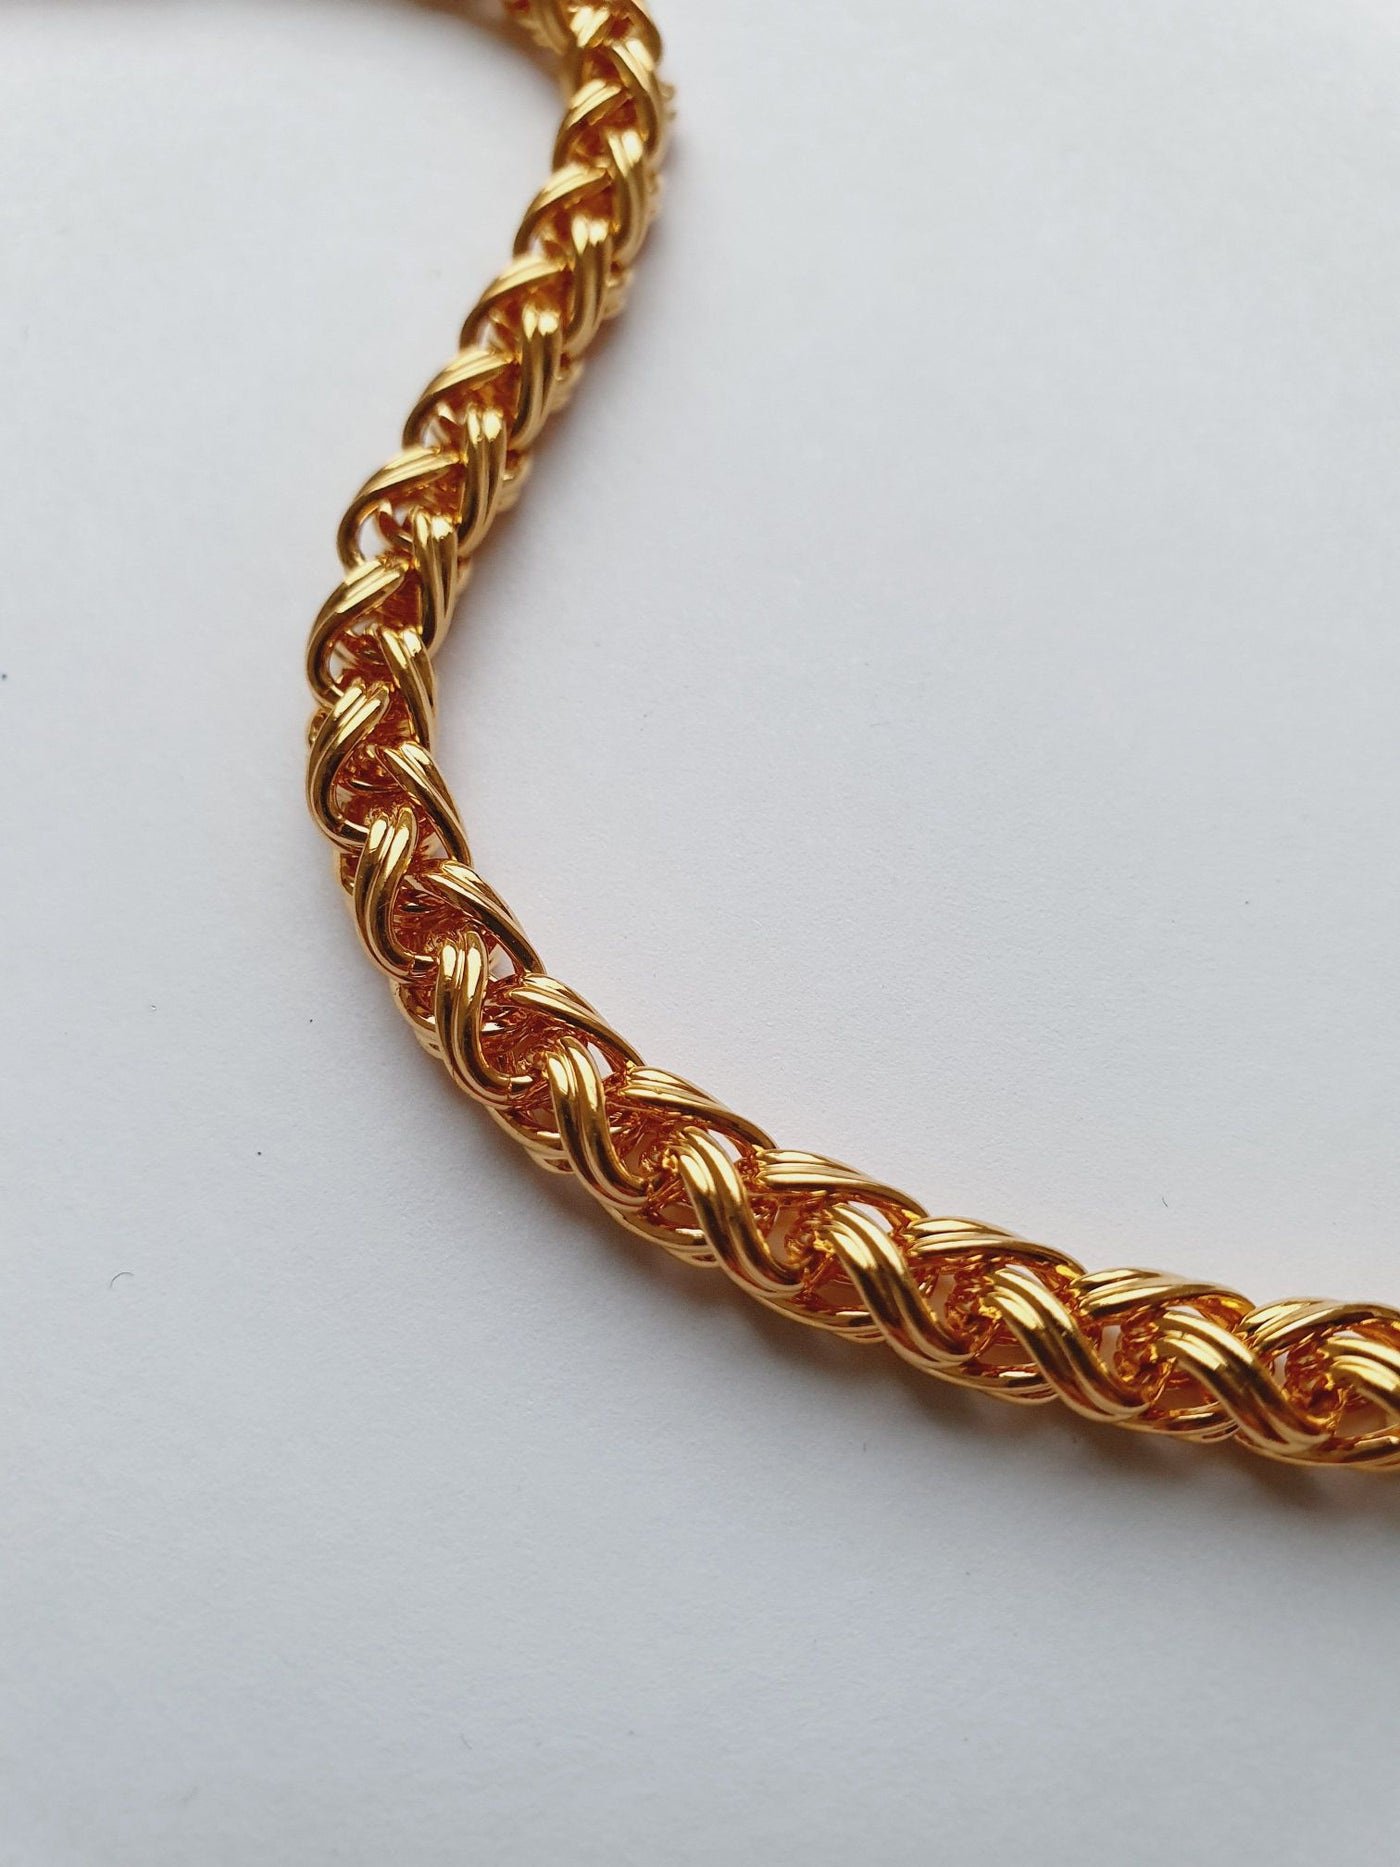 Vintage Gold Plated Rope Chain Bracelet